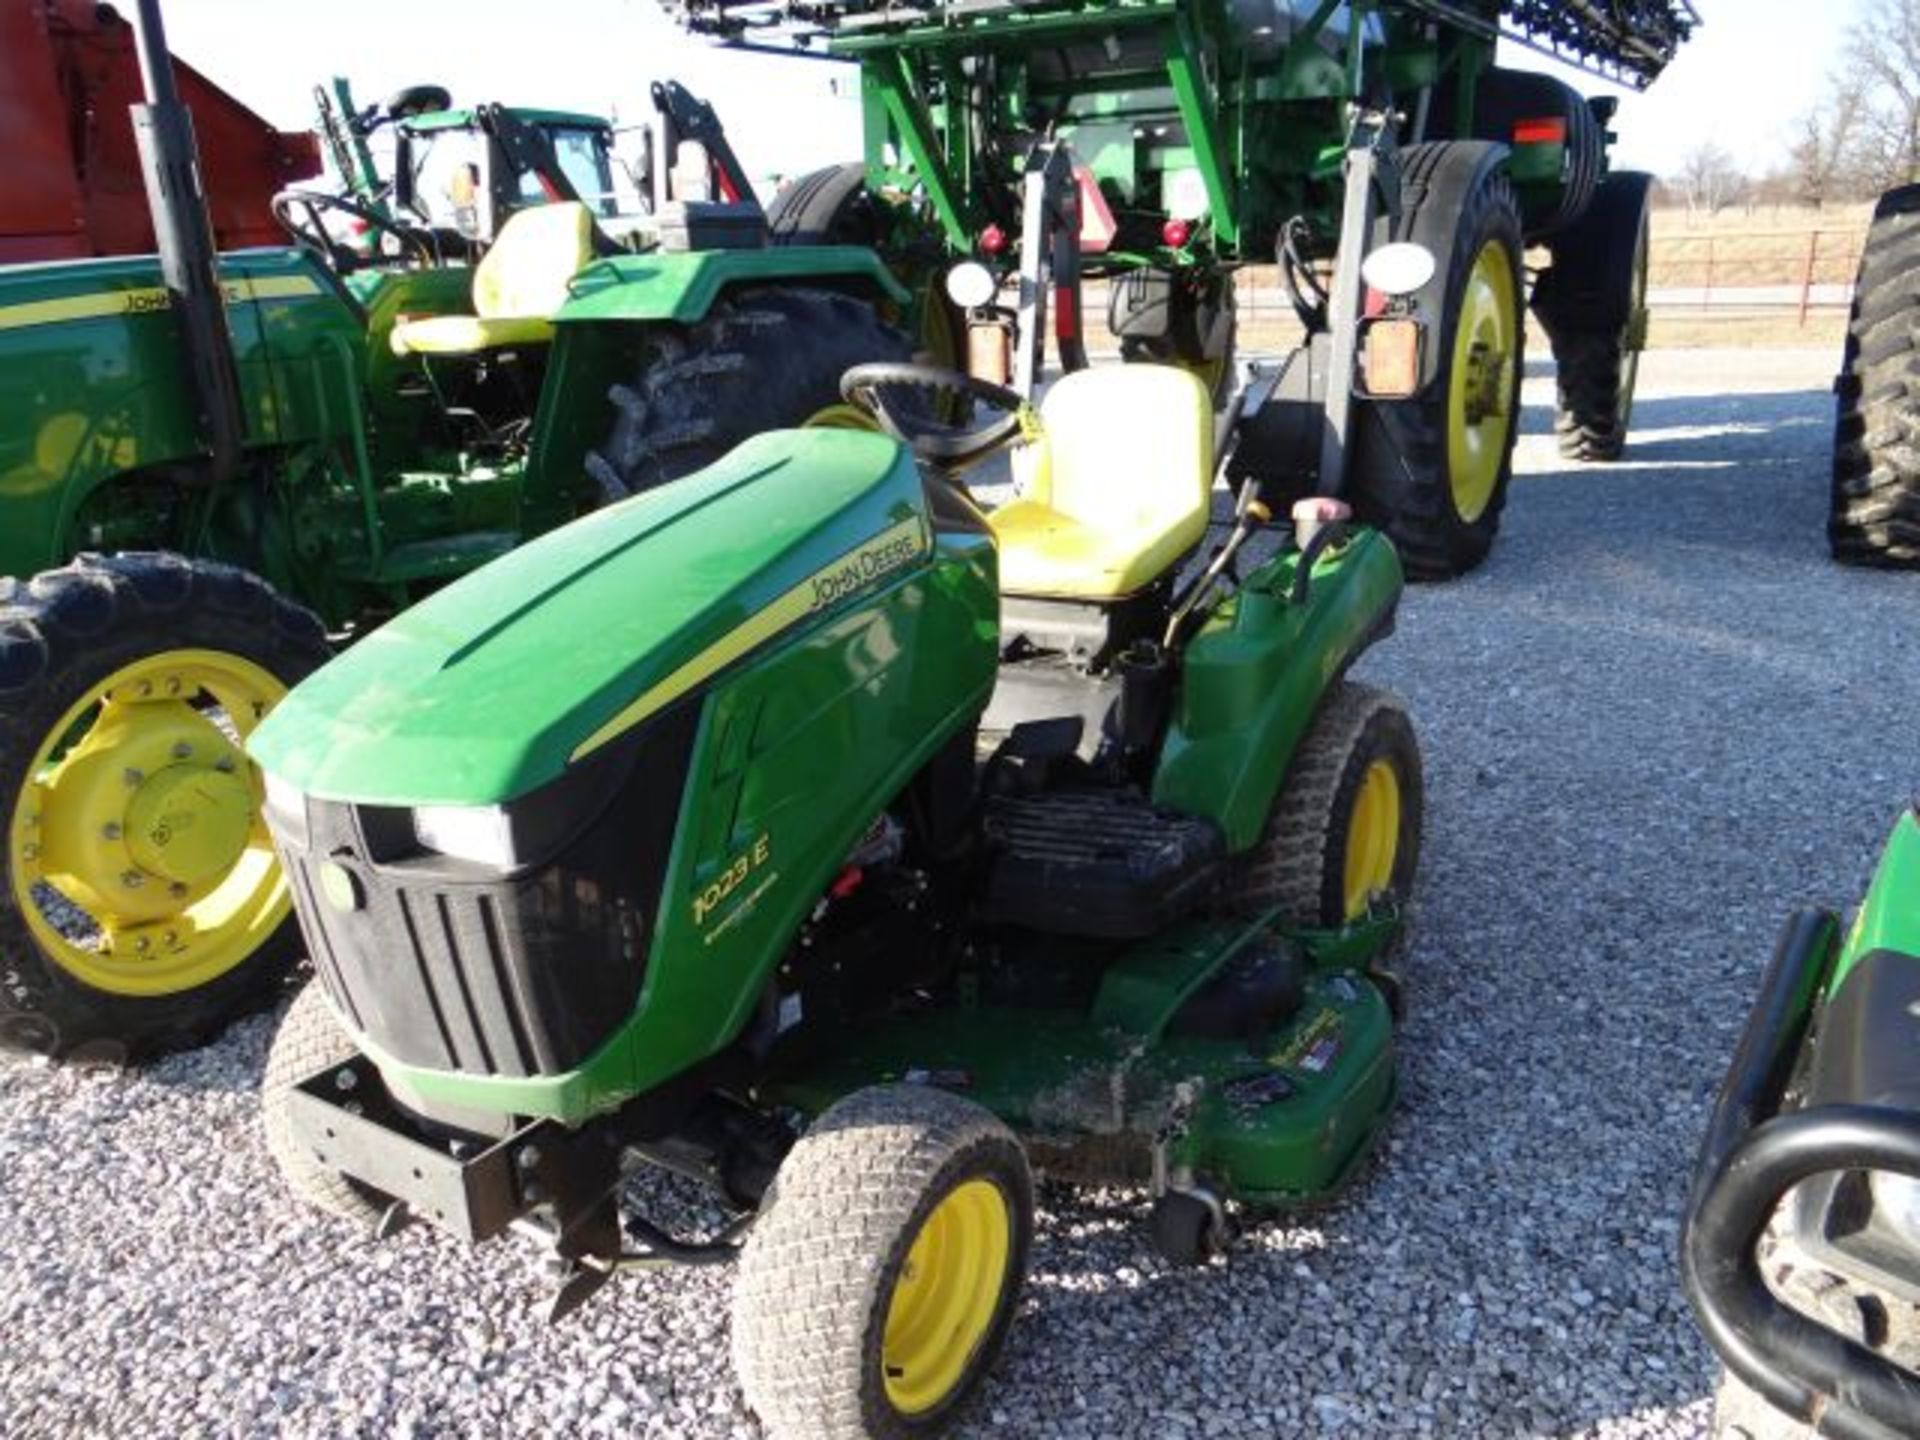 JD 1023E Compact Tractor, 2011 #112140, 405 hrs, Turf Tires, Foldable ROPS, 60D Deck